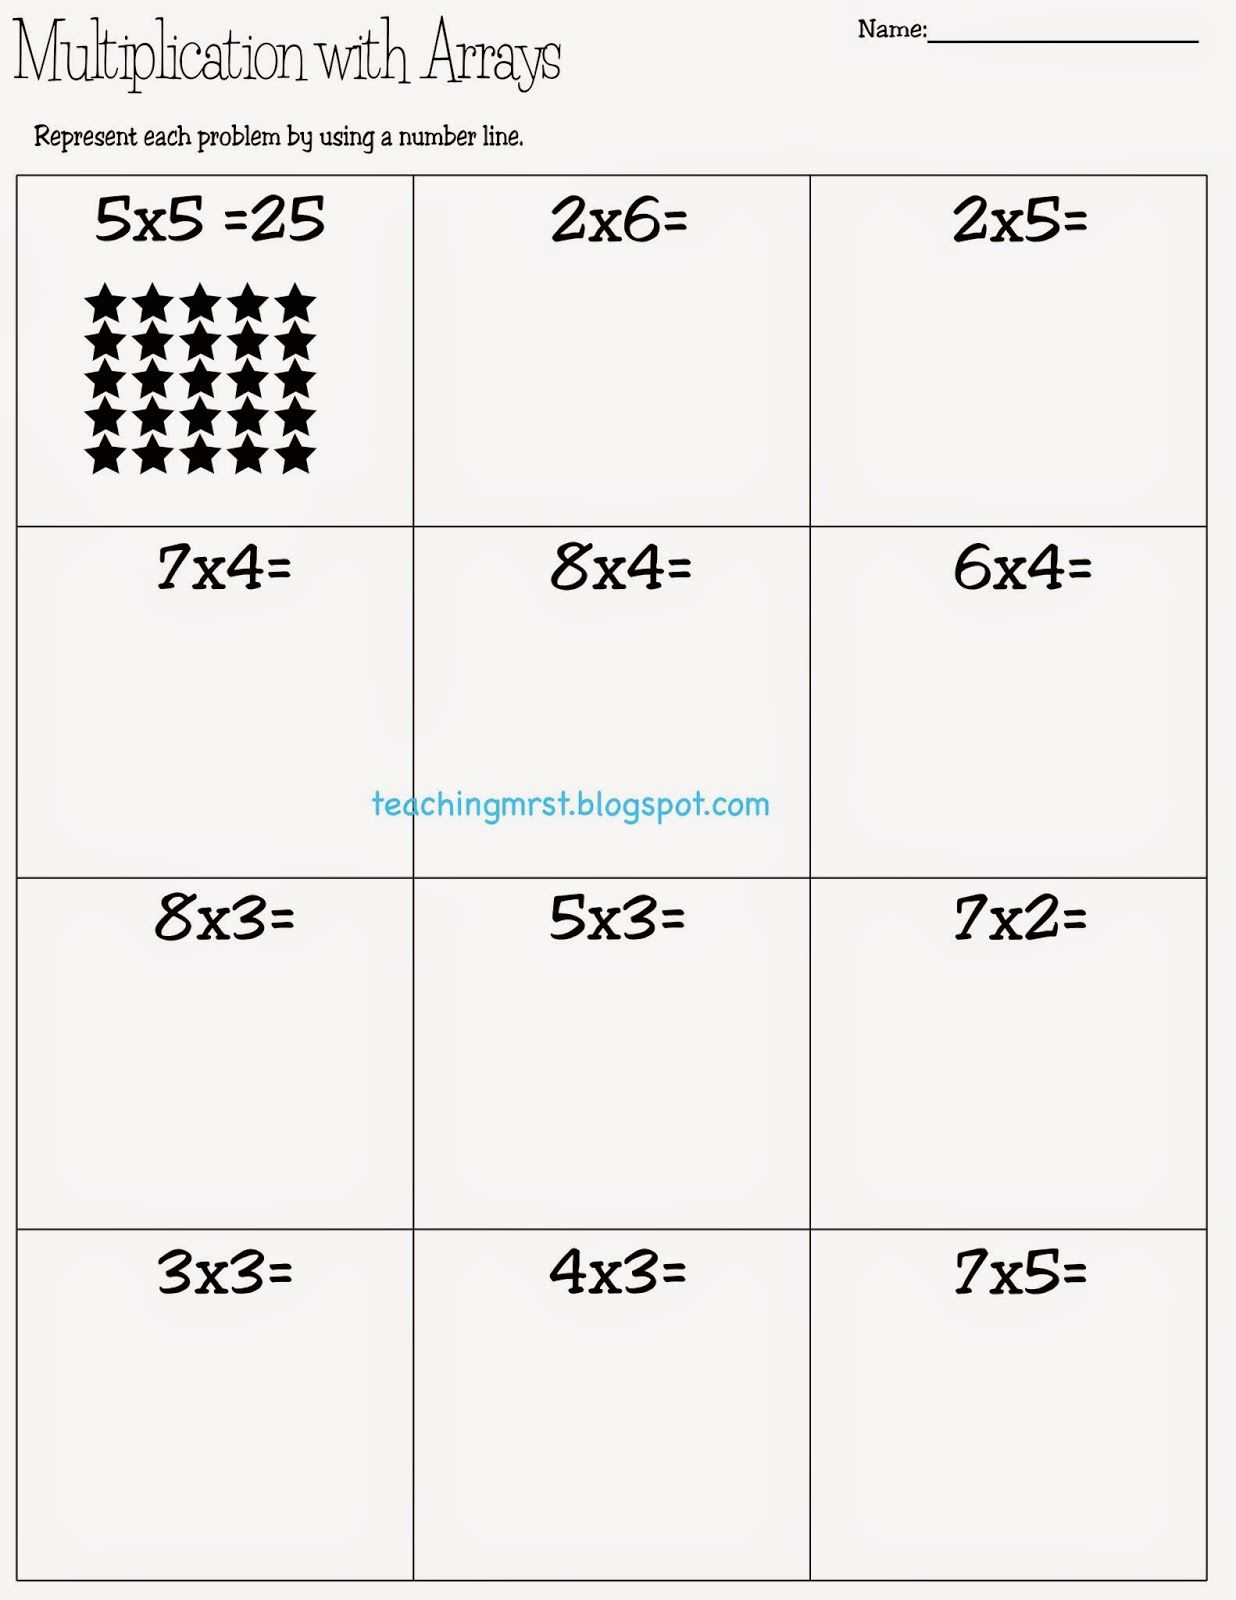 multiplication-flash-cards-with-arrays-printable-multiplication-flash-cards